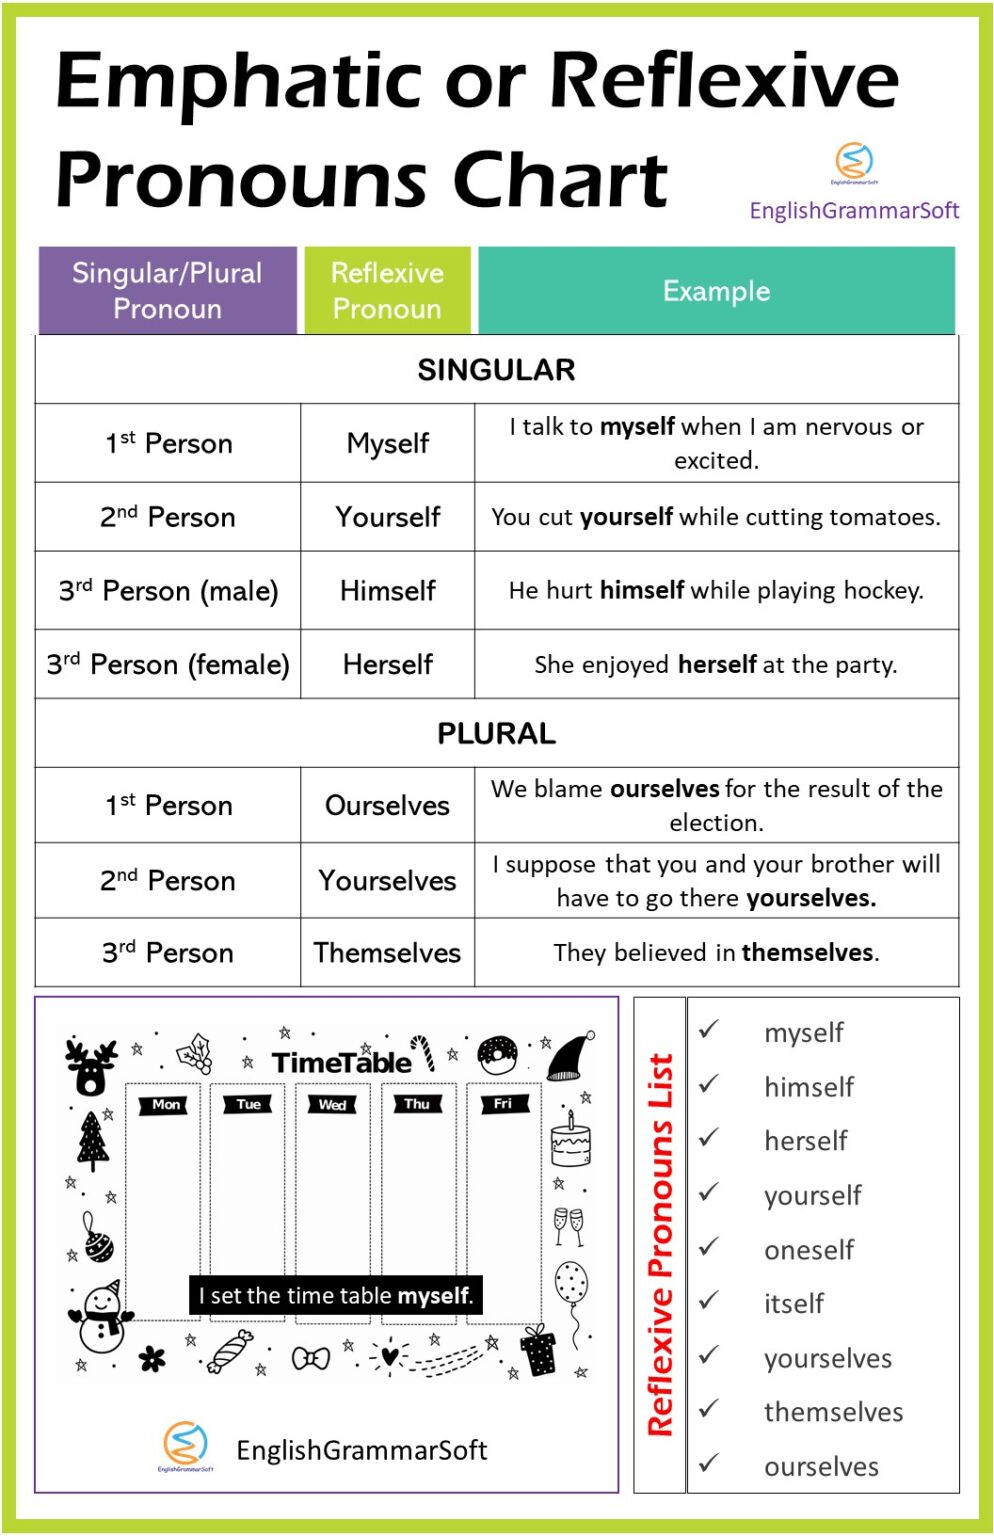 Emphatic Or Reflexive Pronouns Chart 80 Examples List EnglishGrammarSoft